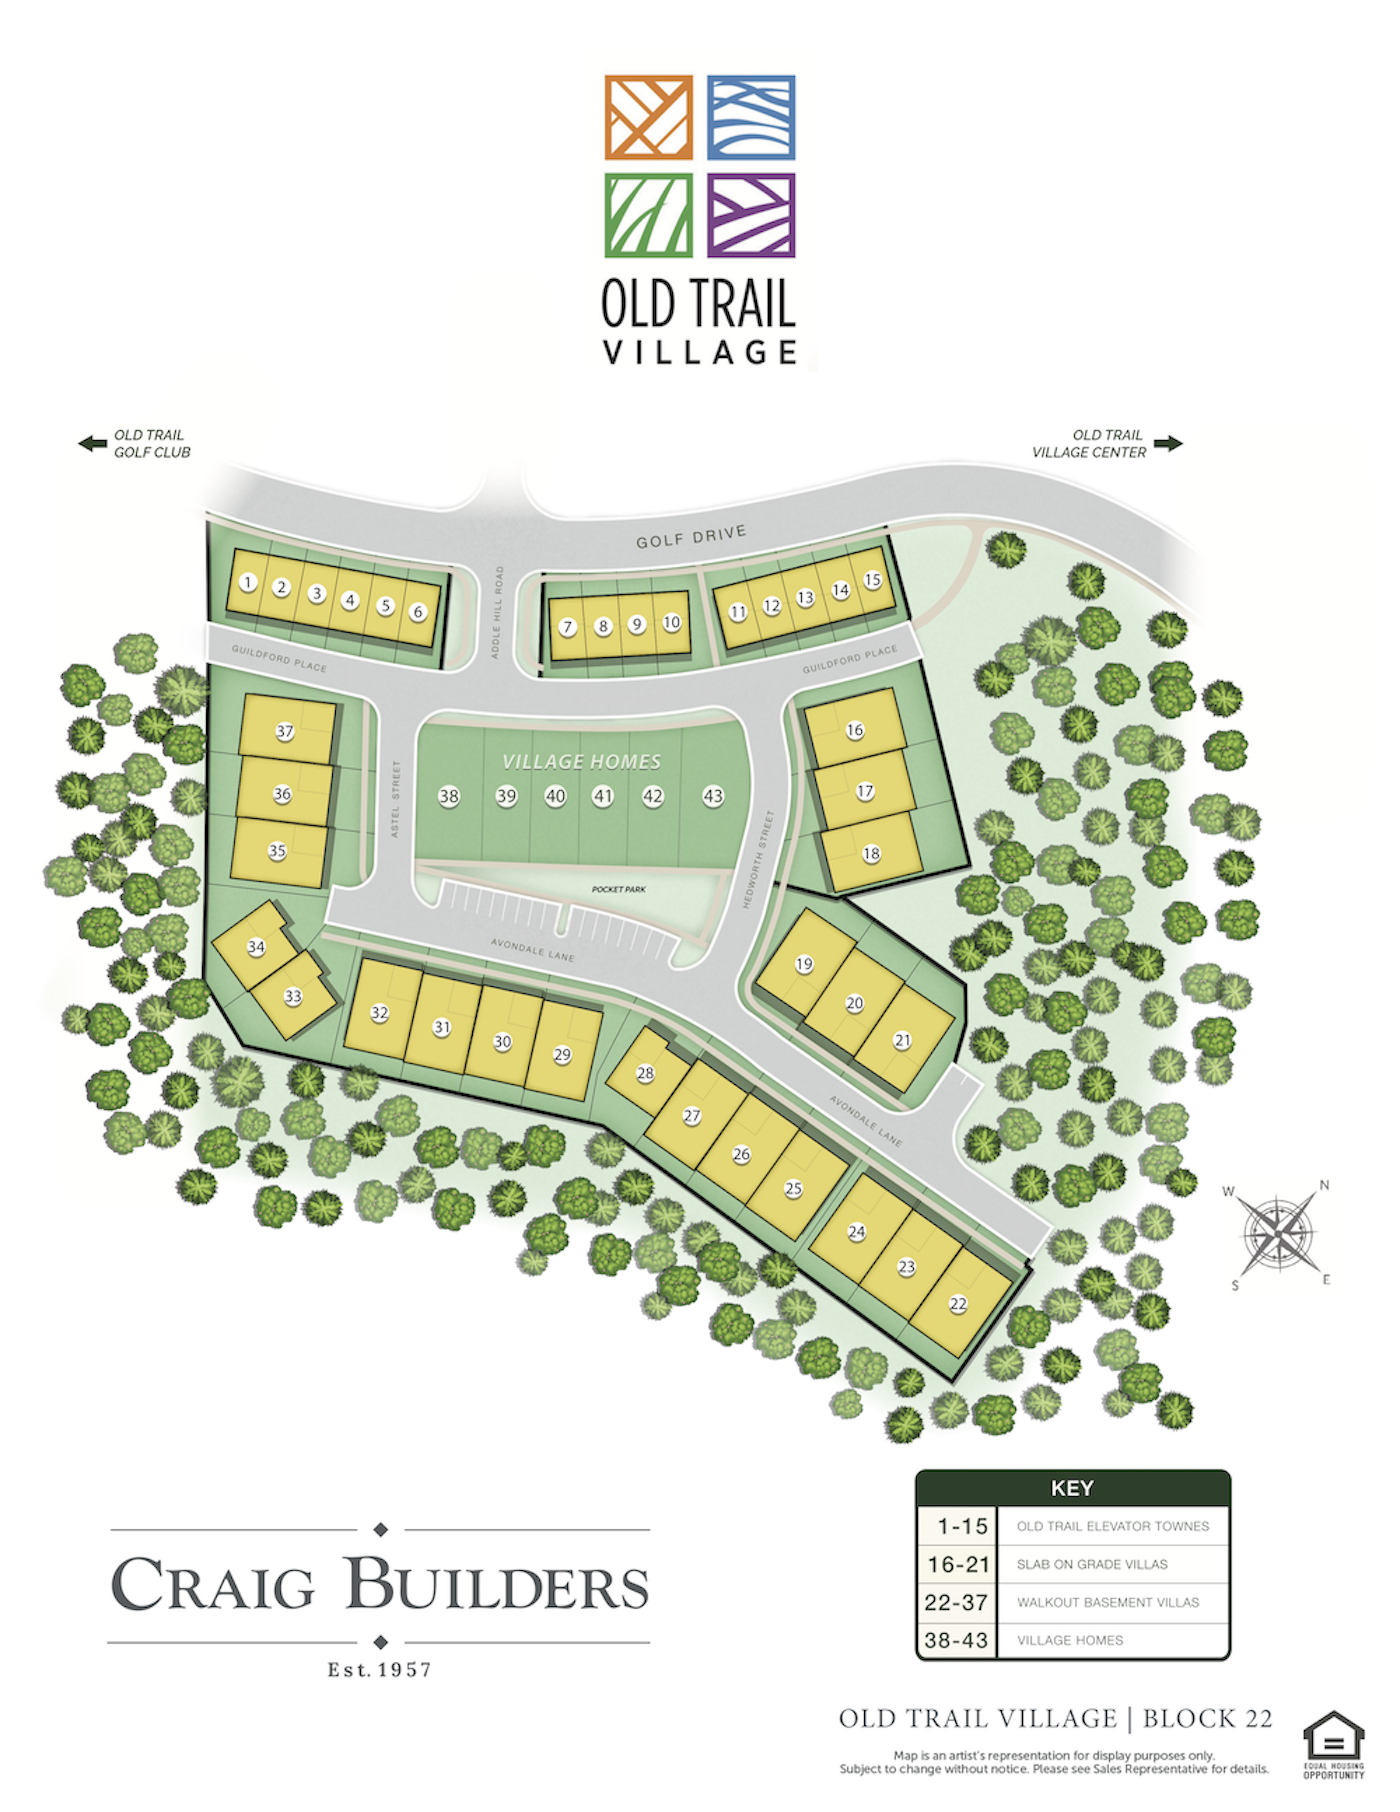 Site Map of Old Trail Village Block 22 built by Craig Builders